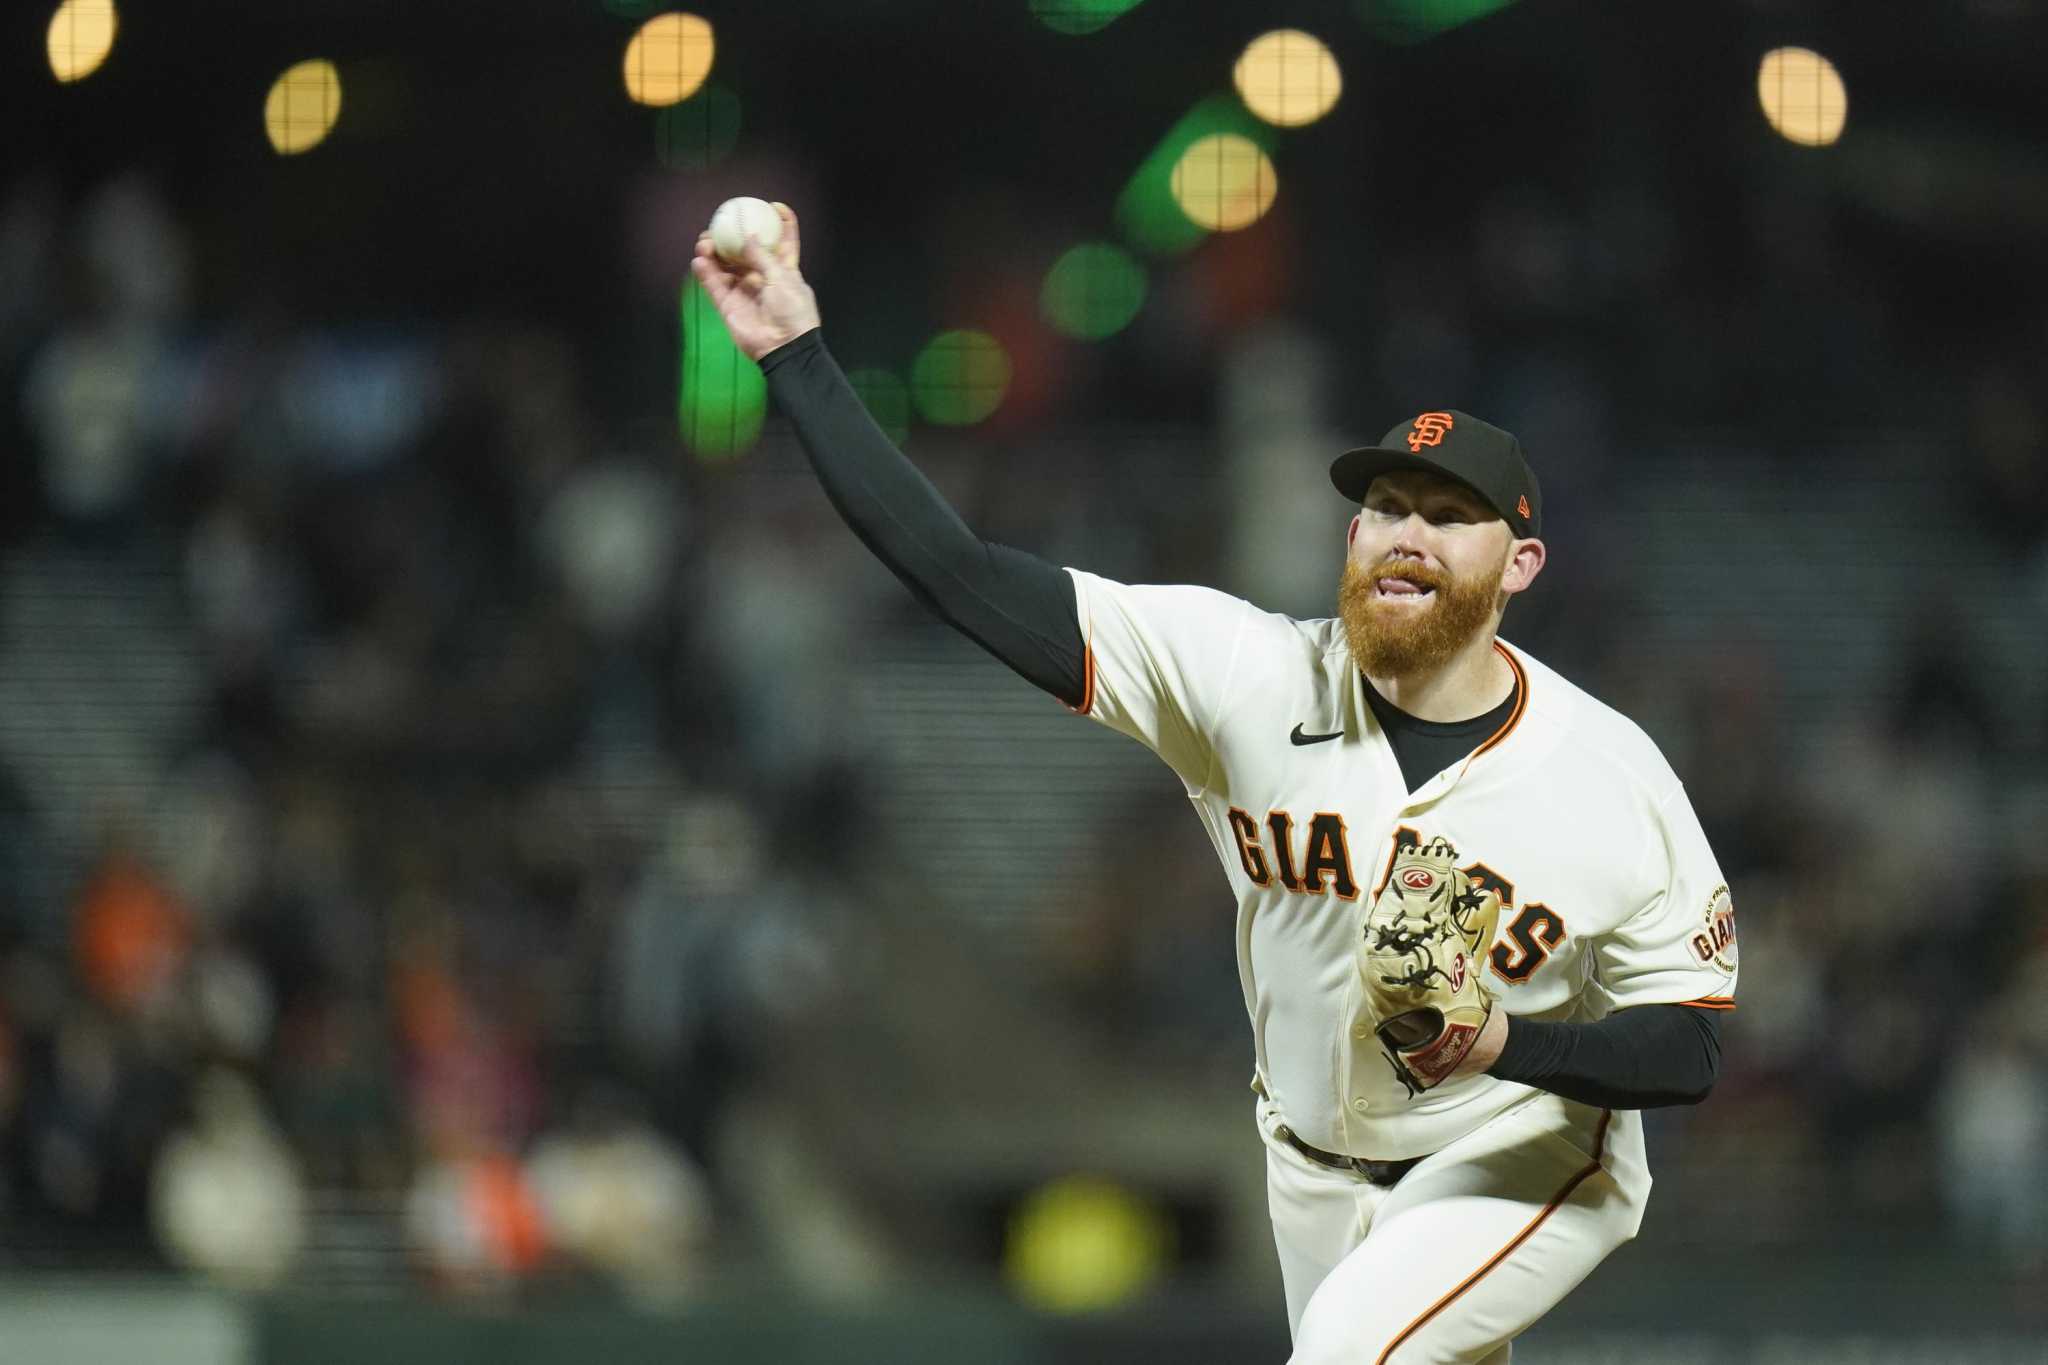 Zack Littell Comes Home: Part 2, Sports